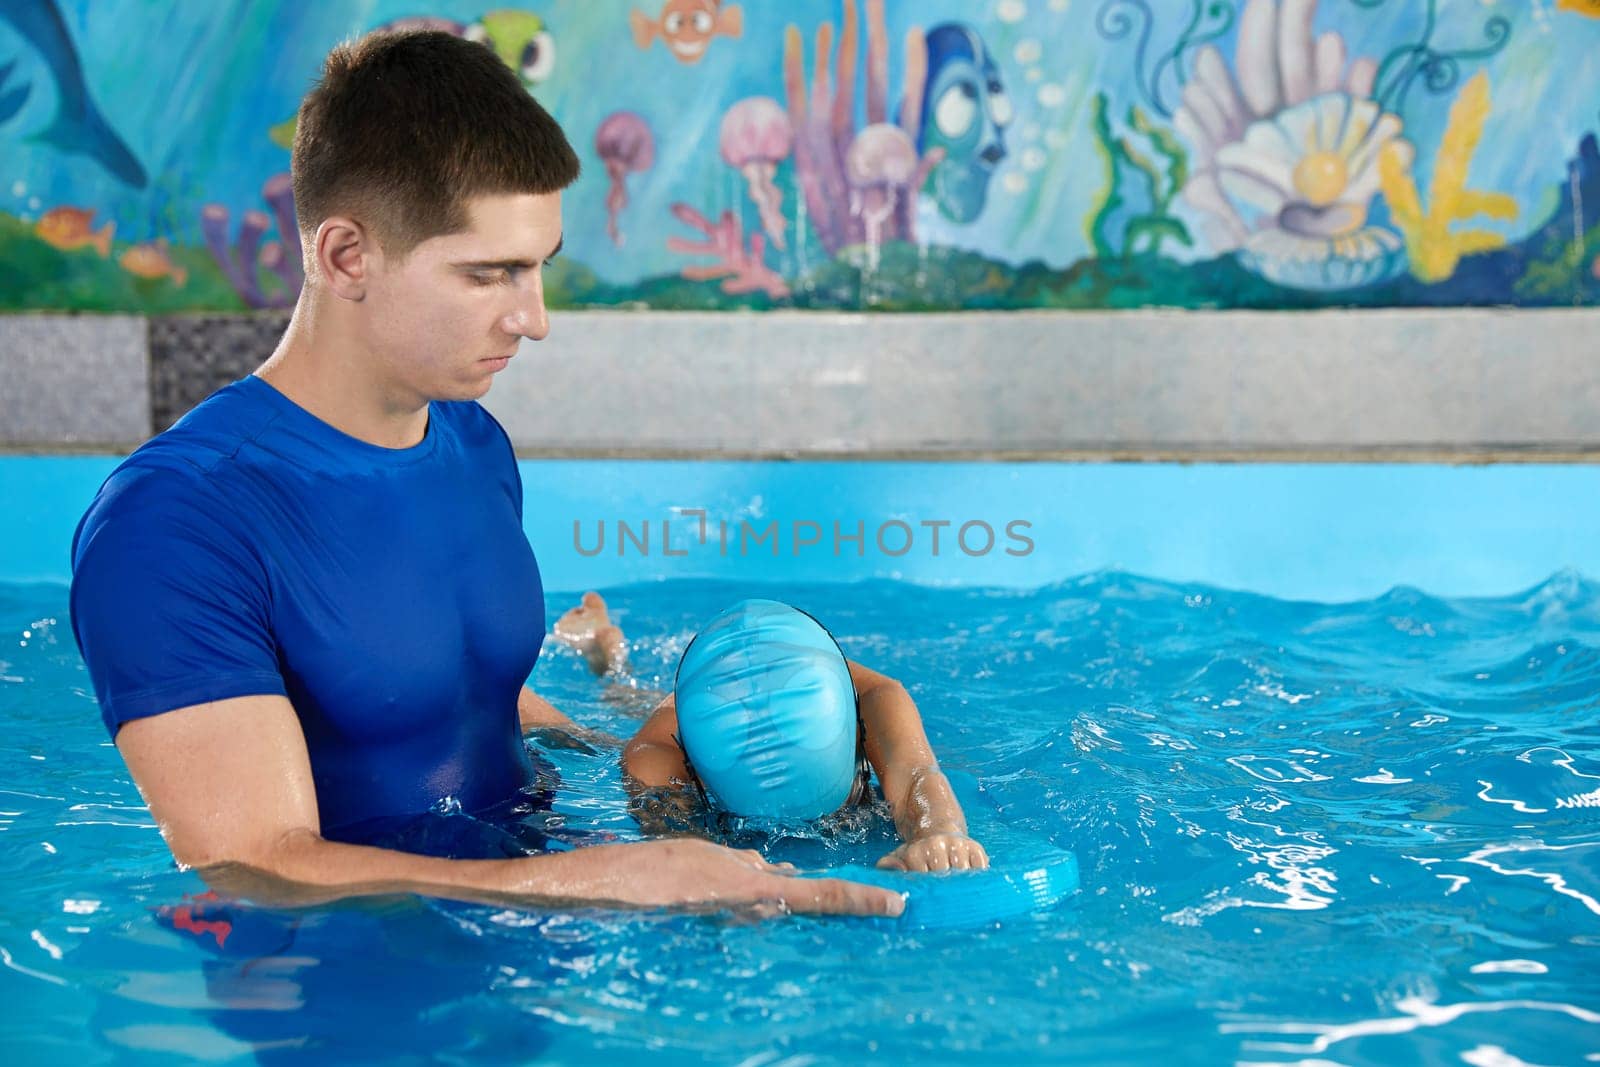 Little boy learning to swim in indoor pool with pool board. Swimming lesson. Active child swims in water with teacher